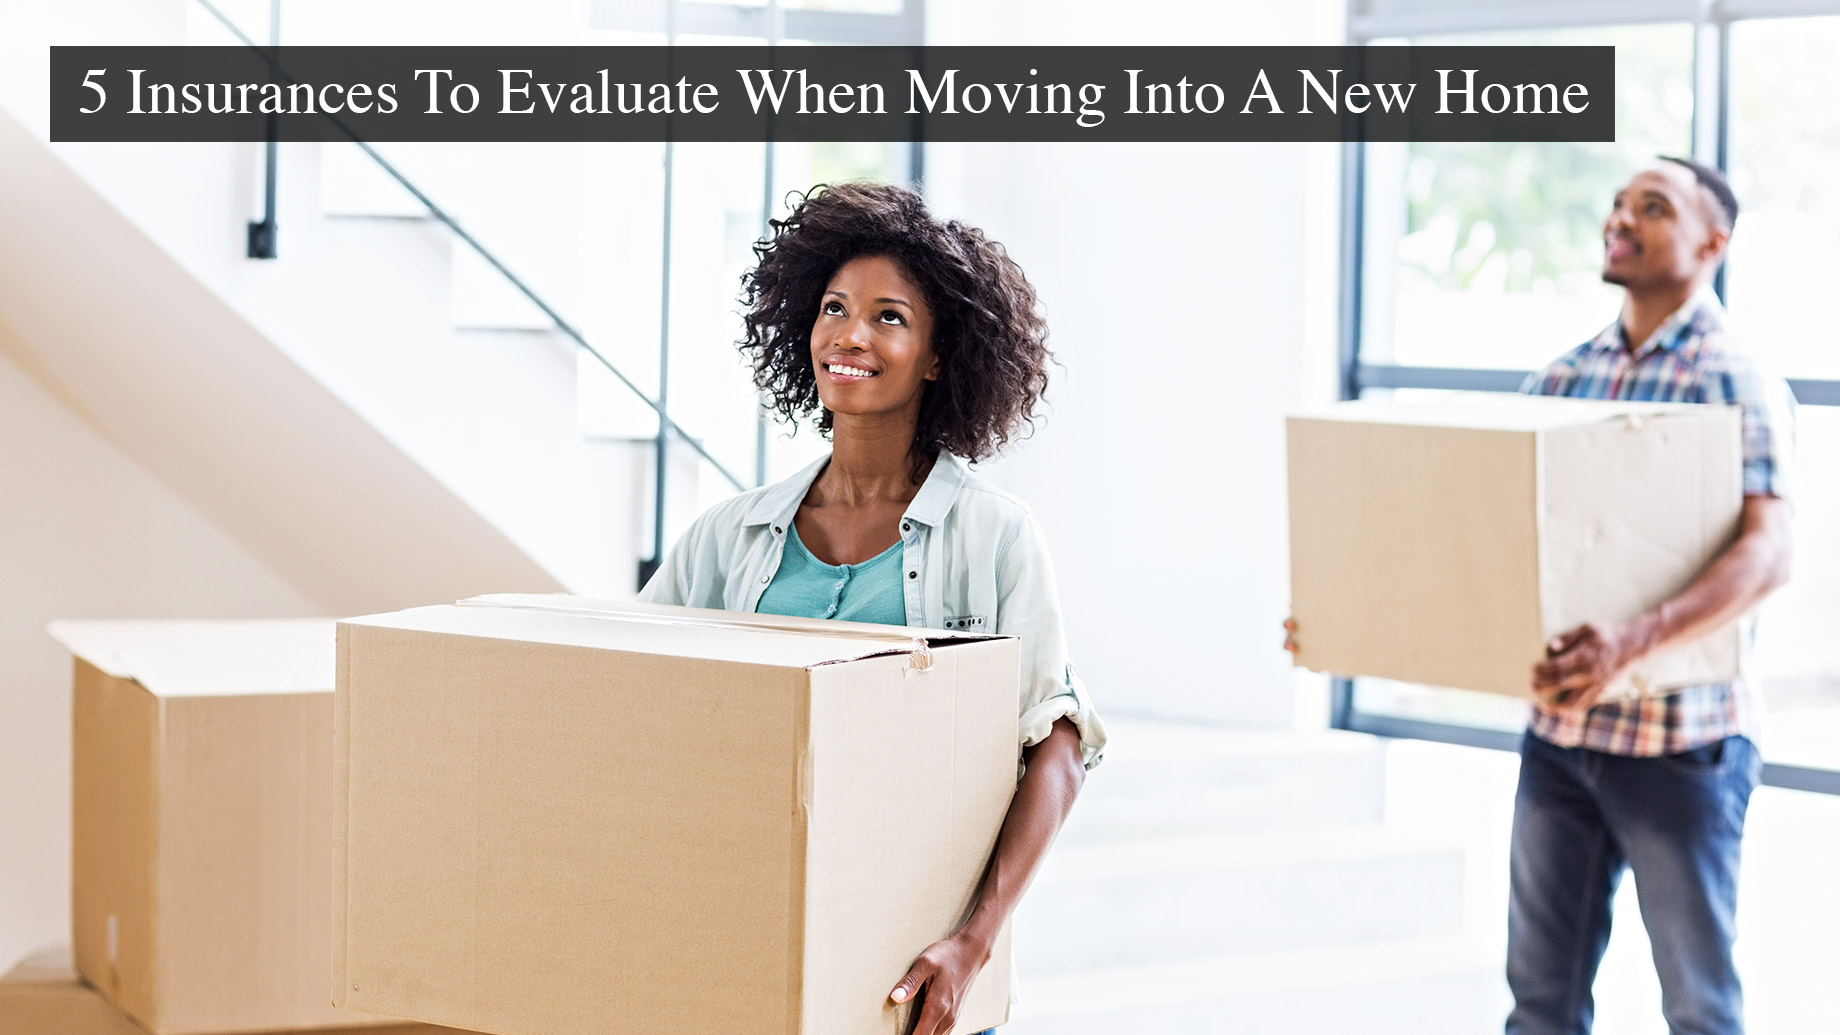 5 Insurances To Evaluate When Moving Into A New Home